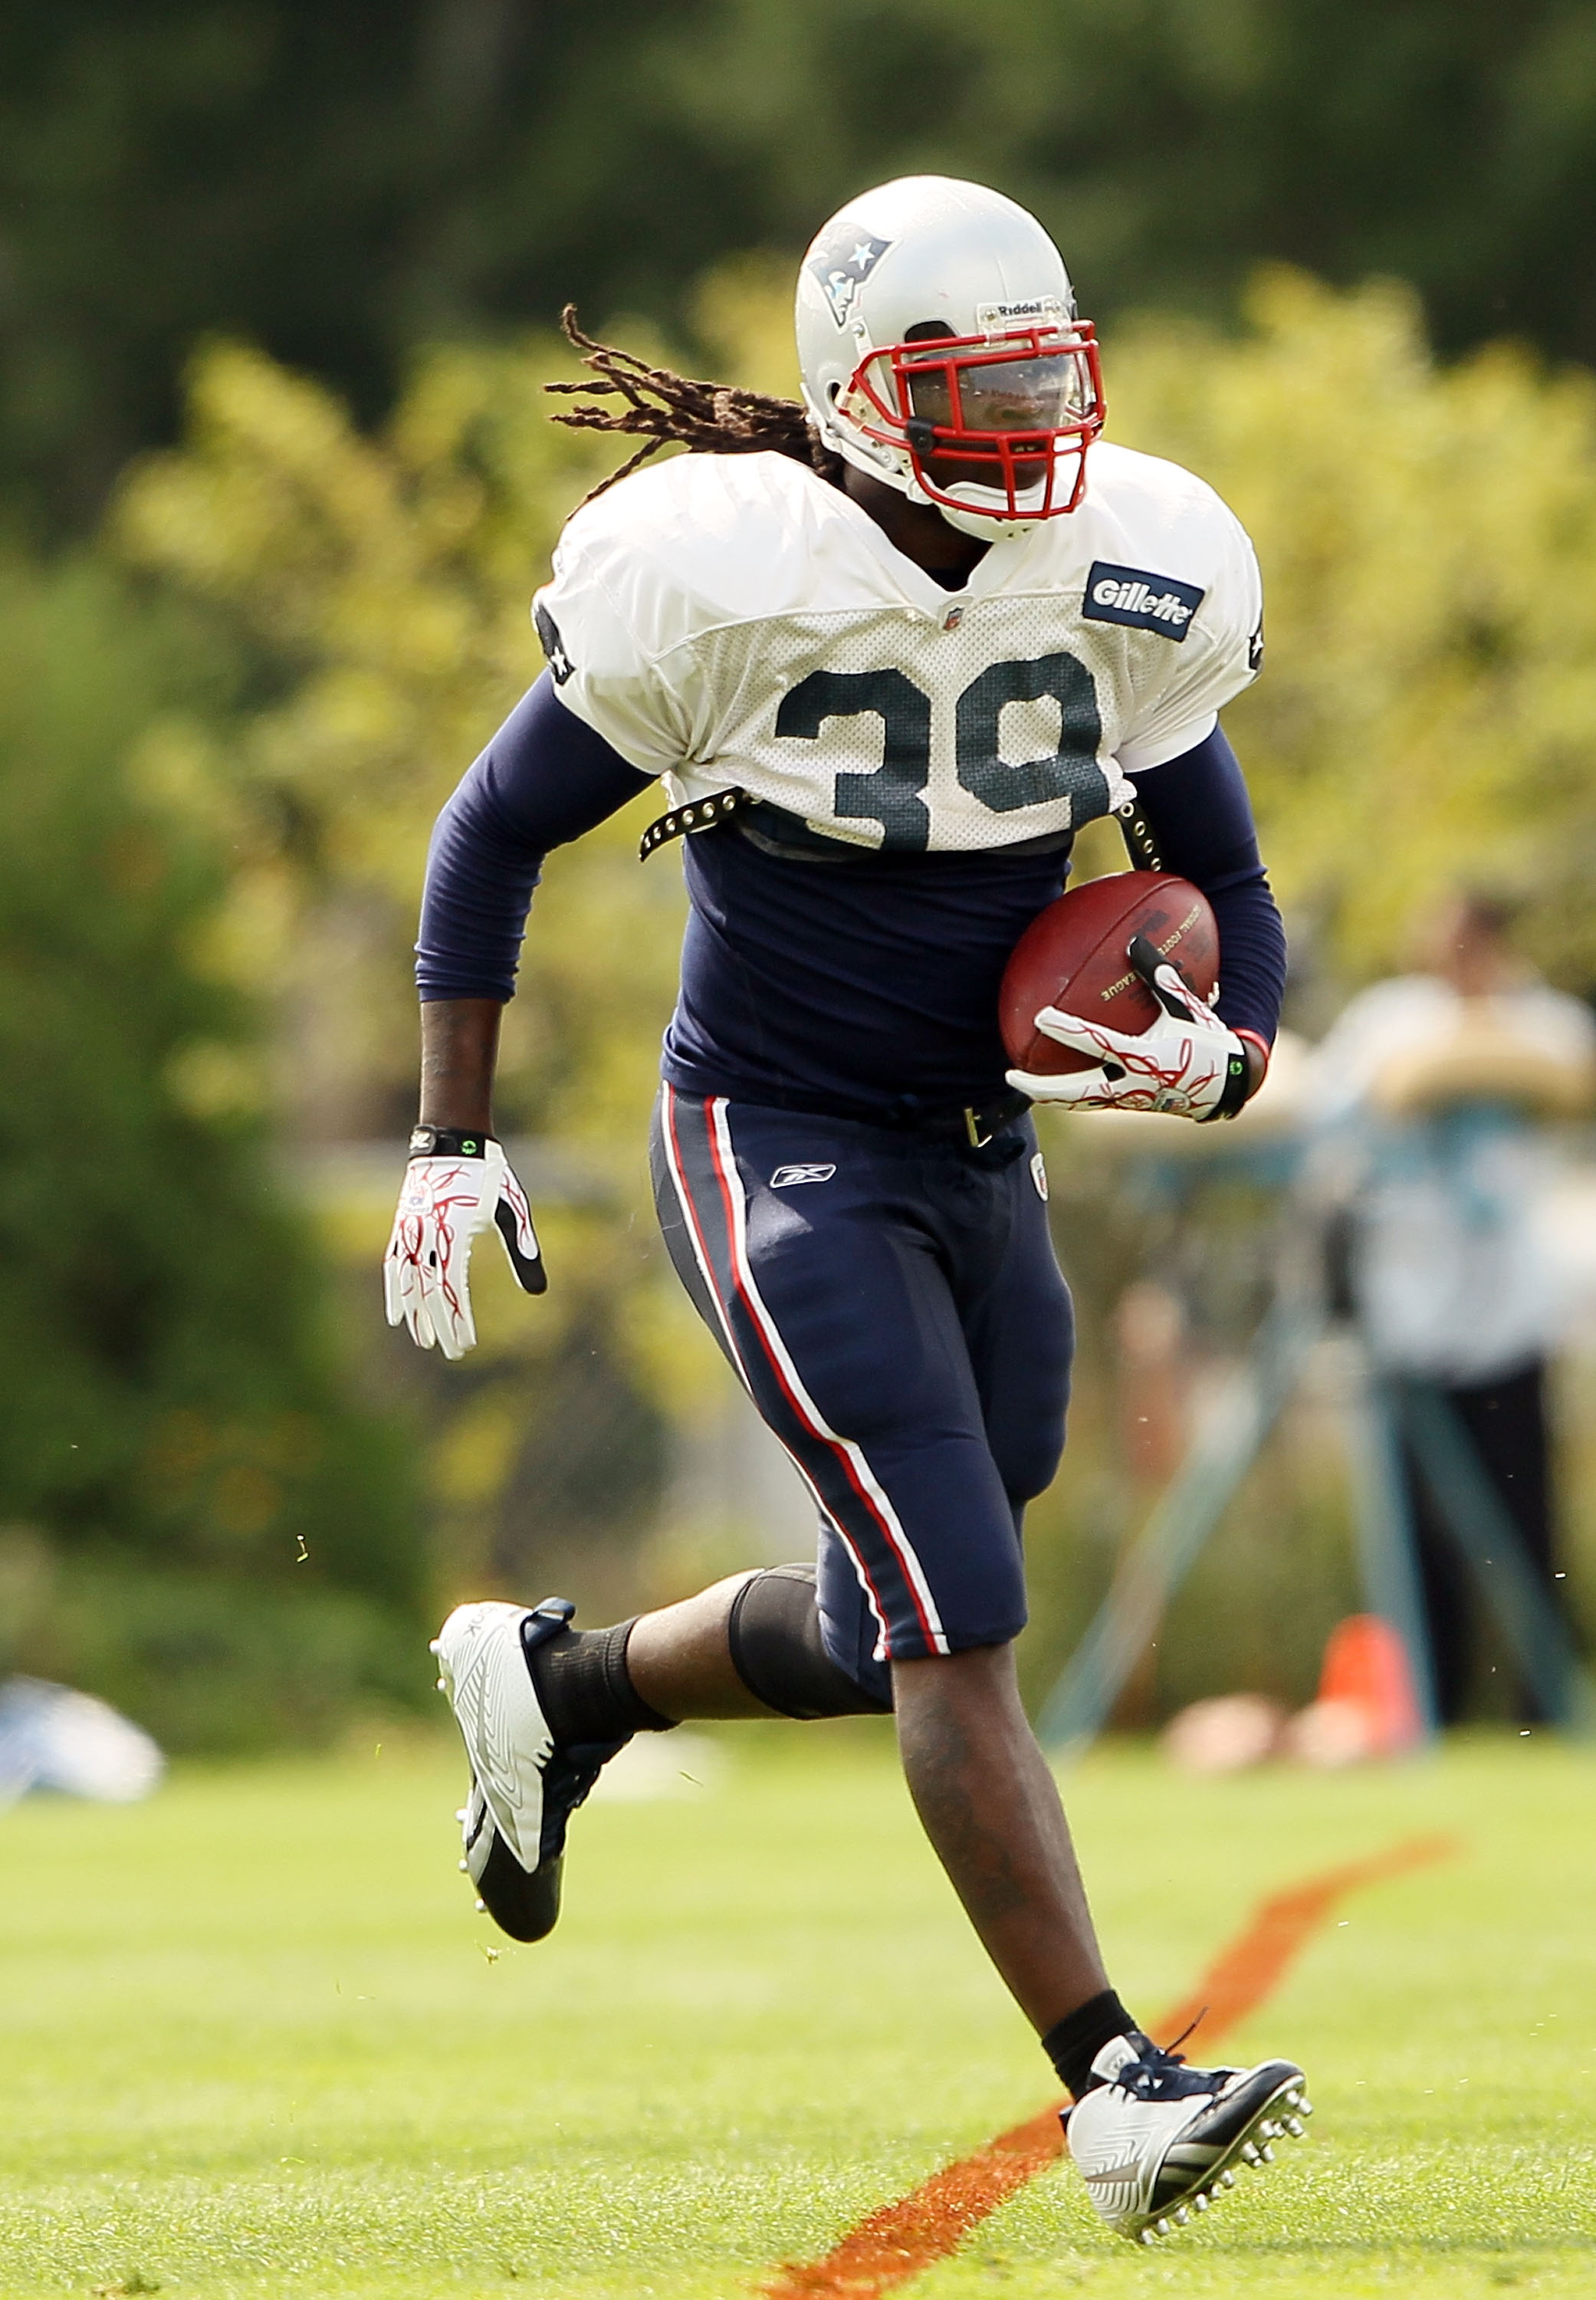 FOXBORO, MA - AUGUST 02:  Laurence Maroney #39 of the New England Patriots carries the ball in a drill during training camp on August 2, 2010 at Gillette Stadium in Foxboro, Massachusetts.  (Photo by Elsa/Getty Images)